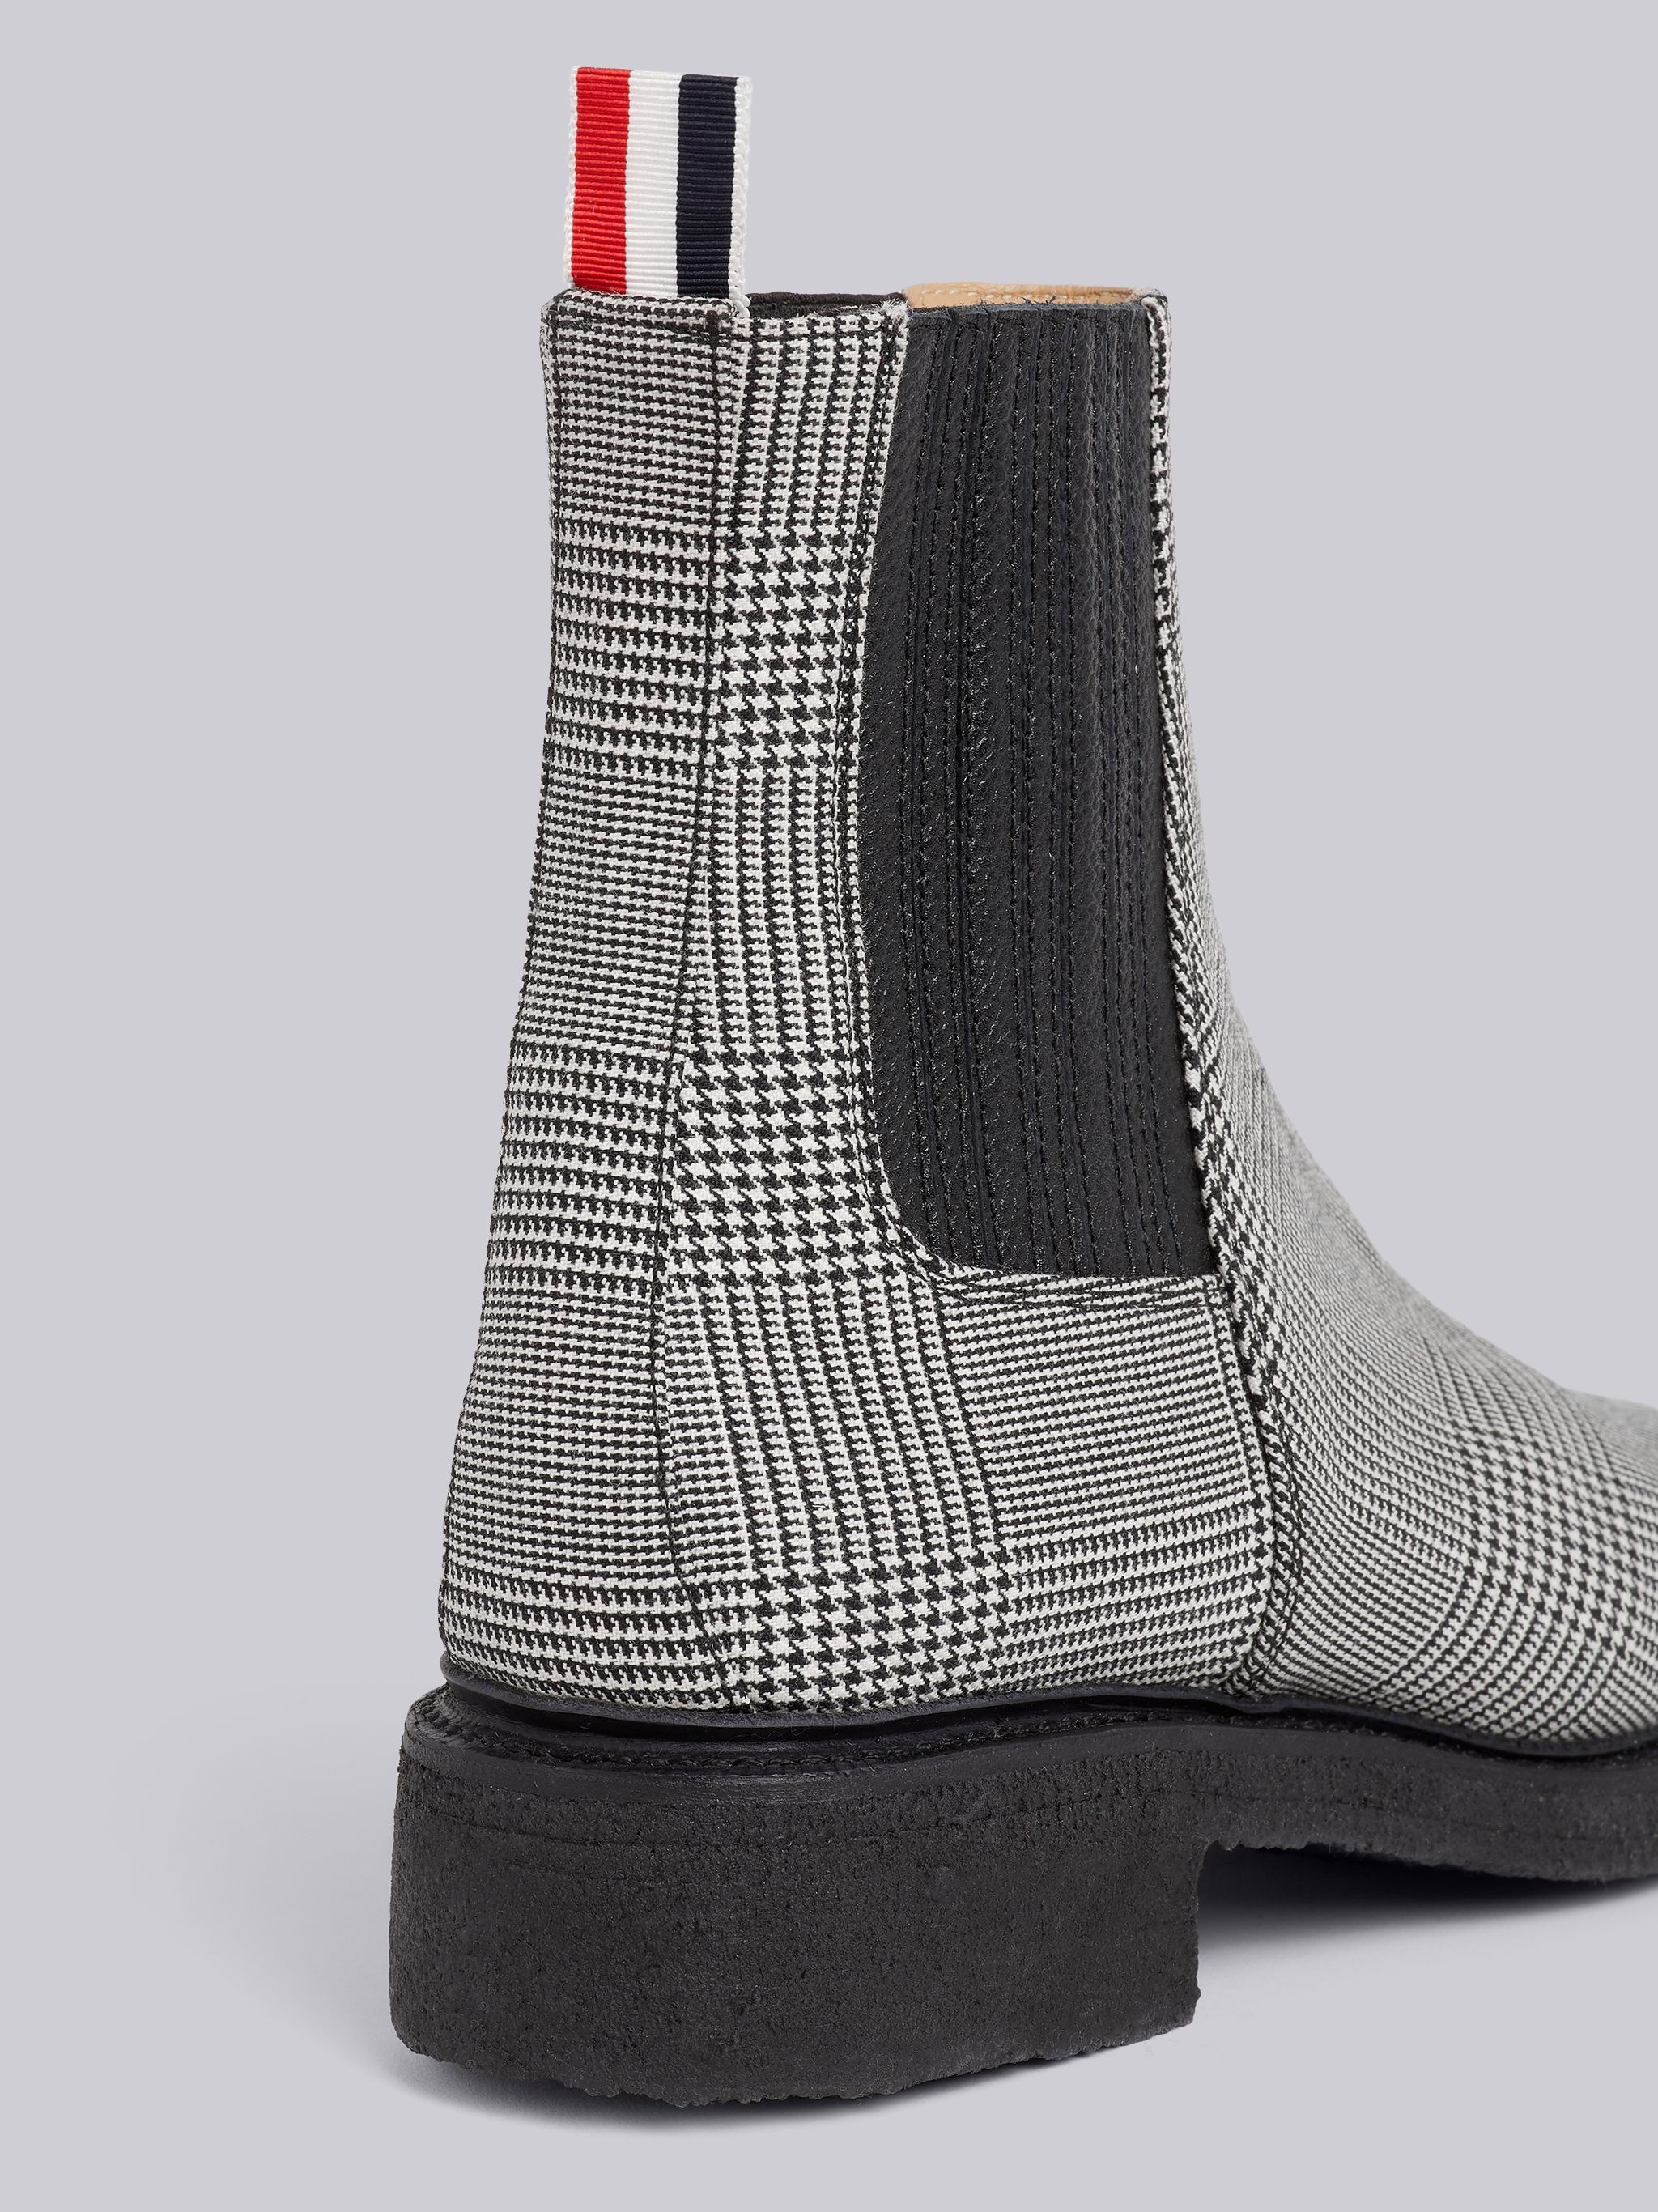 Black and White Prince of Wales Crepe Sole Chelsea Boot - 2